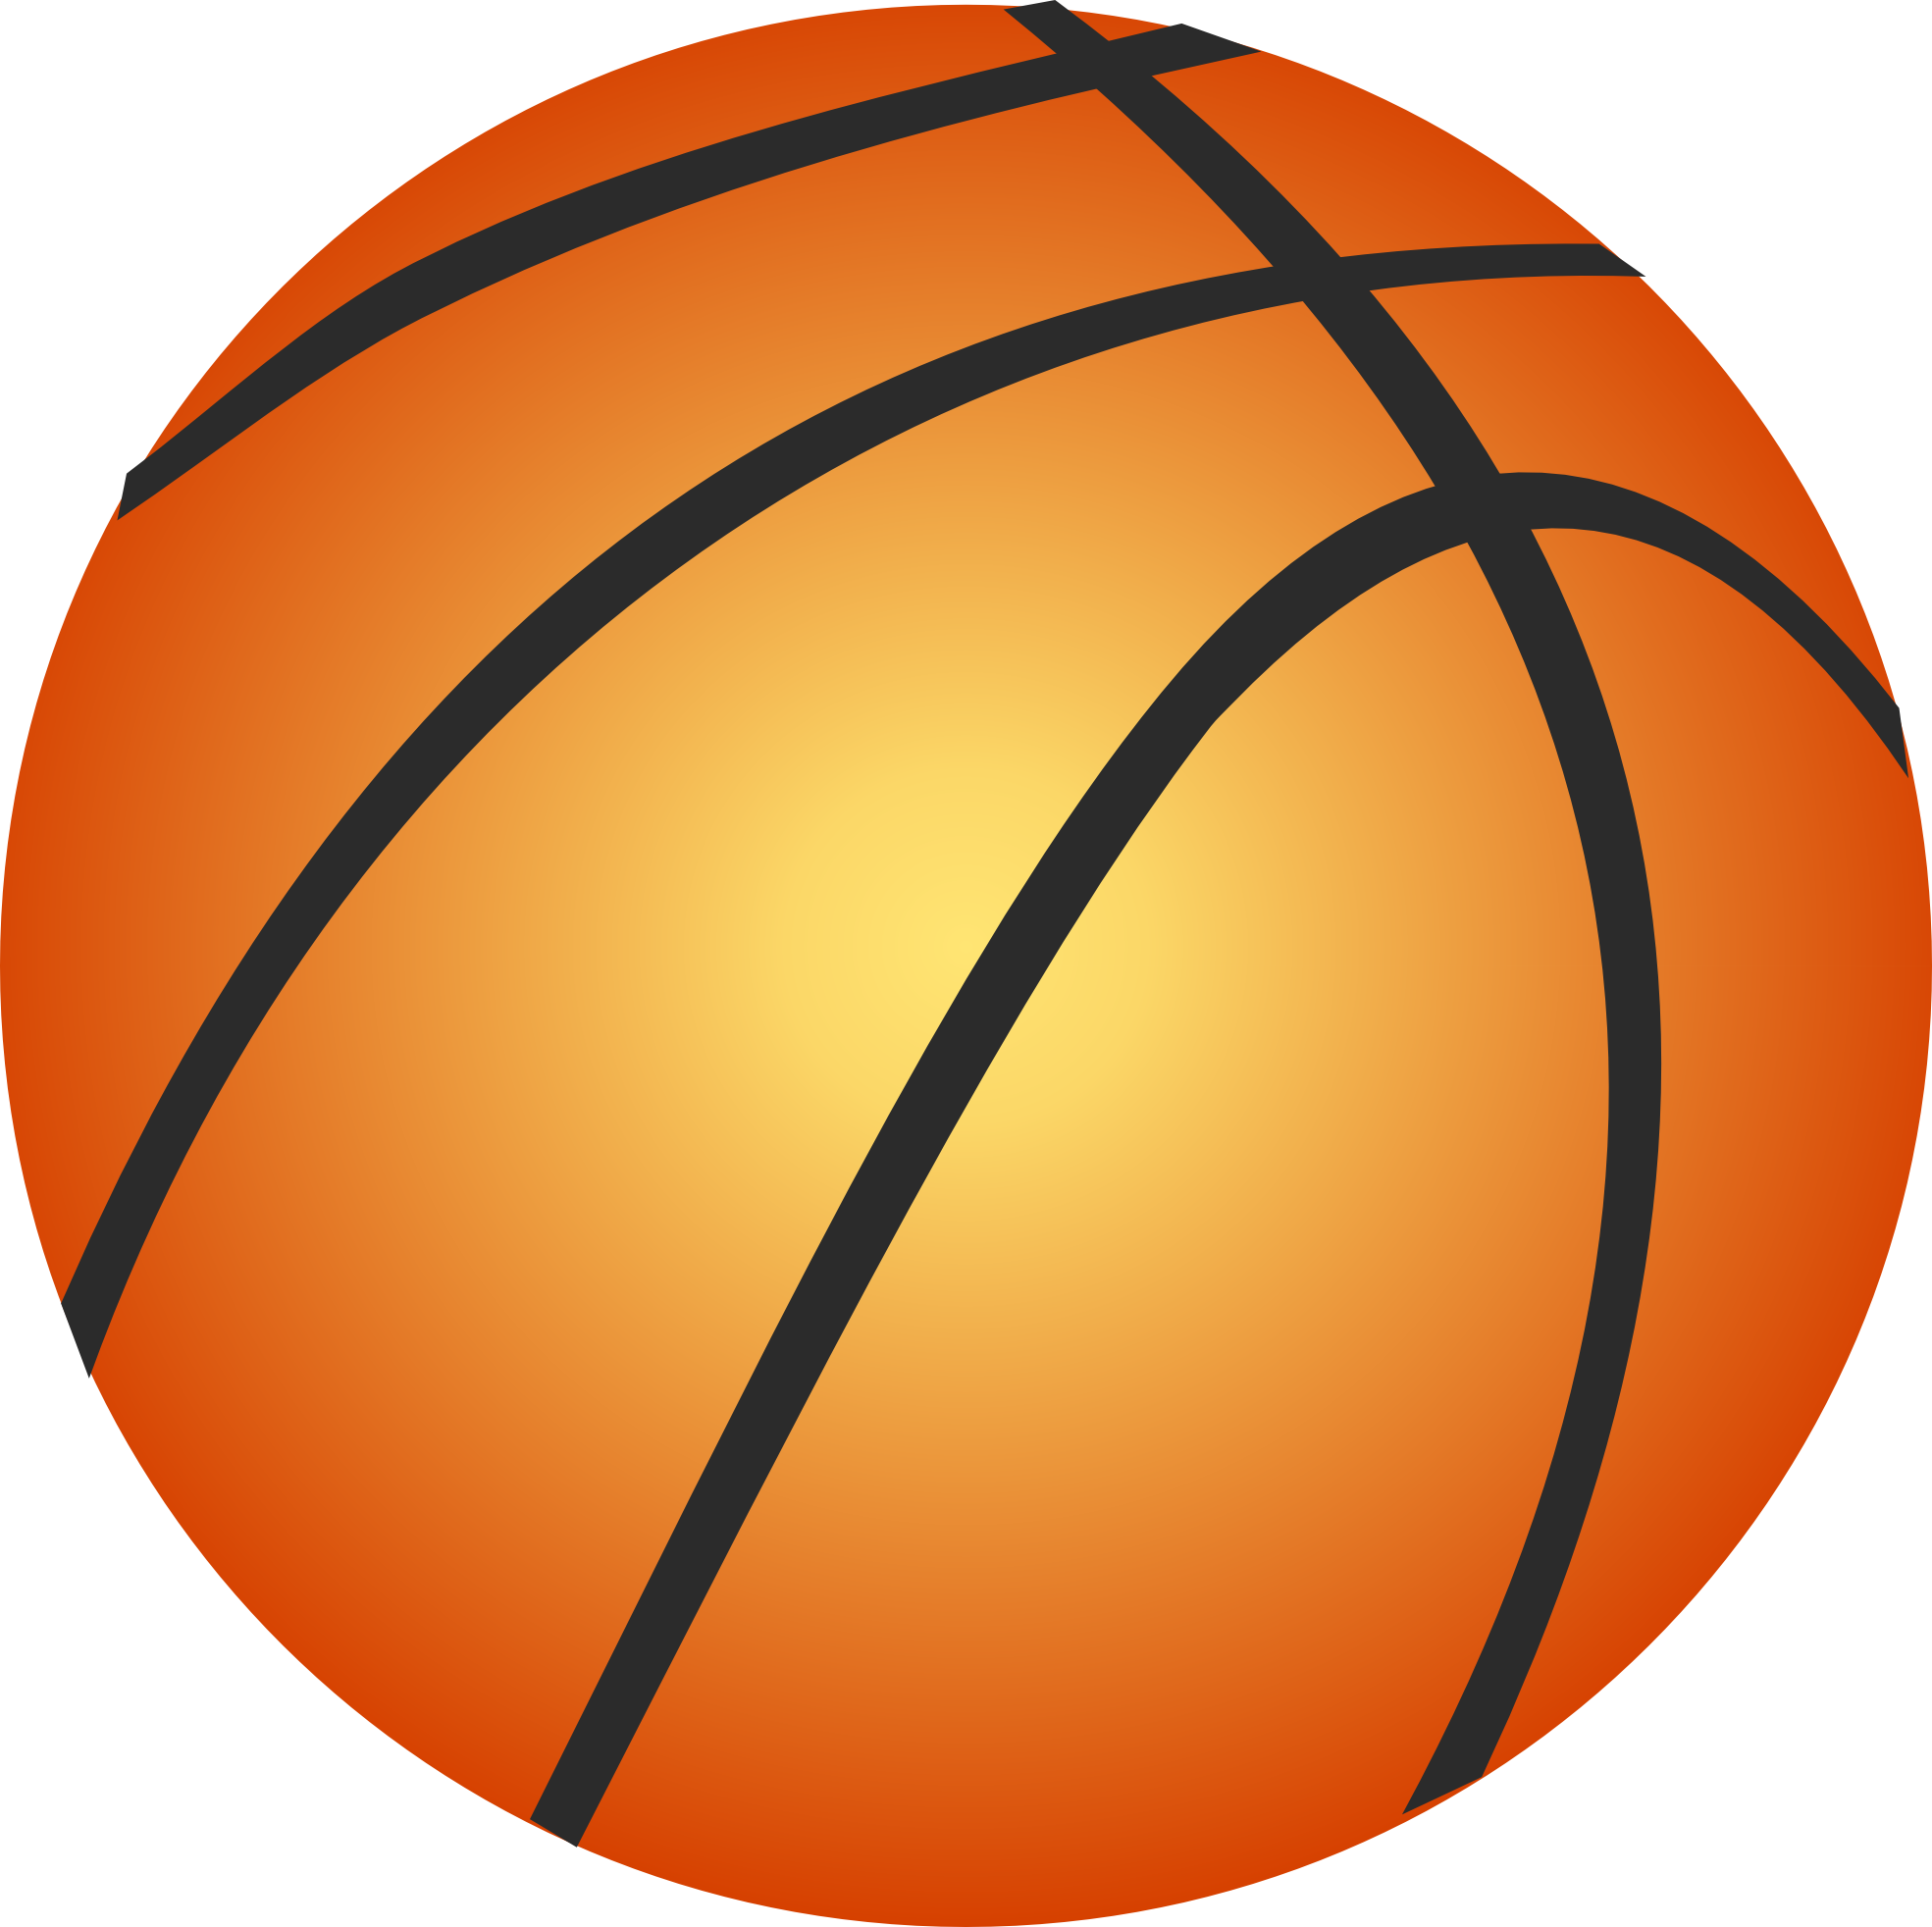 Basketball clipart free clipart images 2